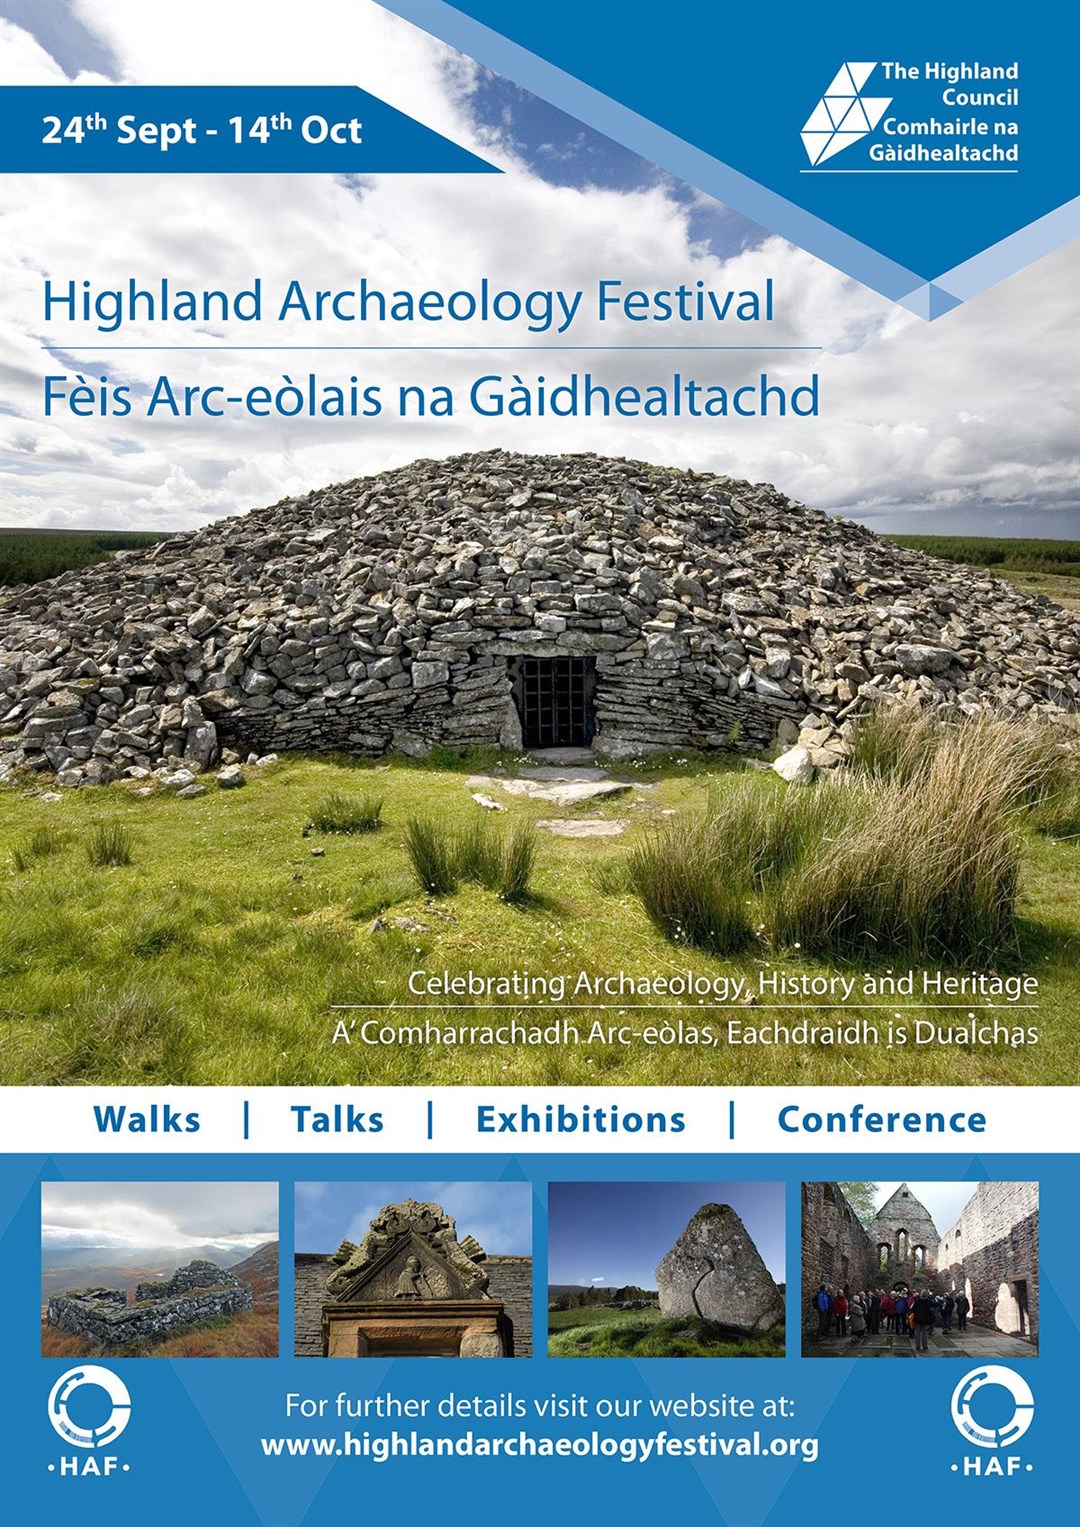 The Highland Archaeology Festival will run across the region between September 24 and October 1.